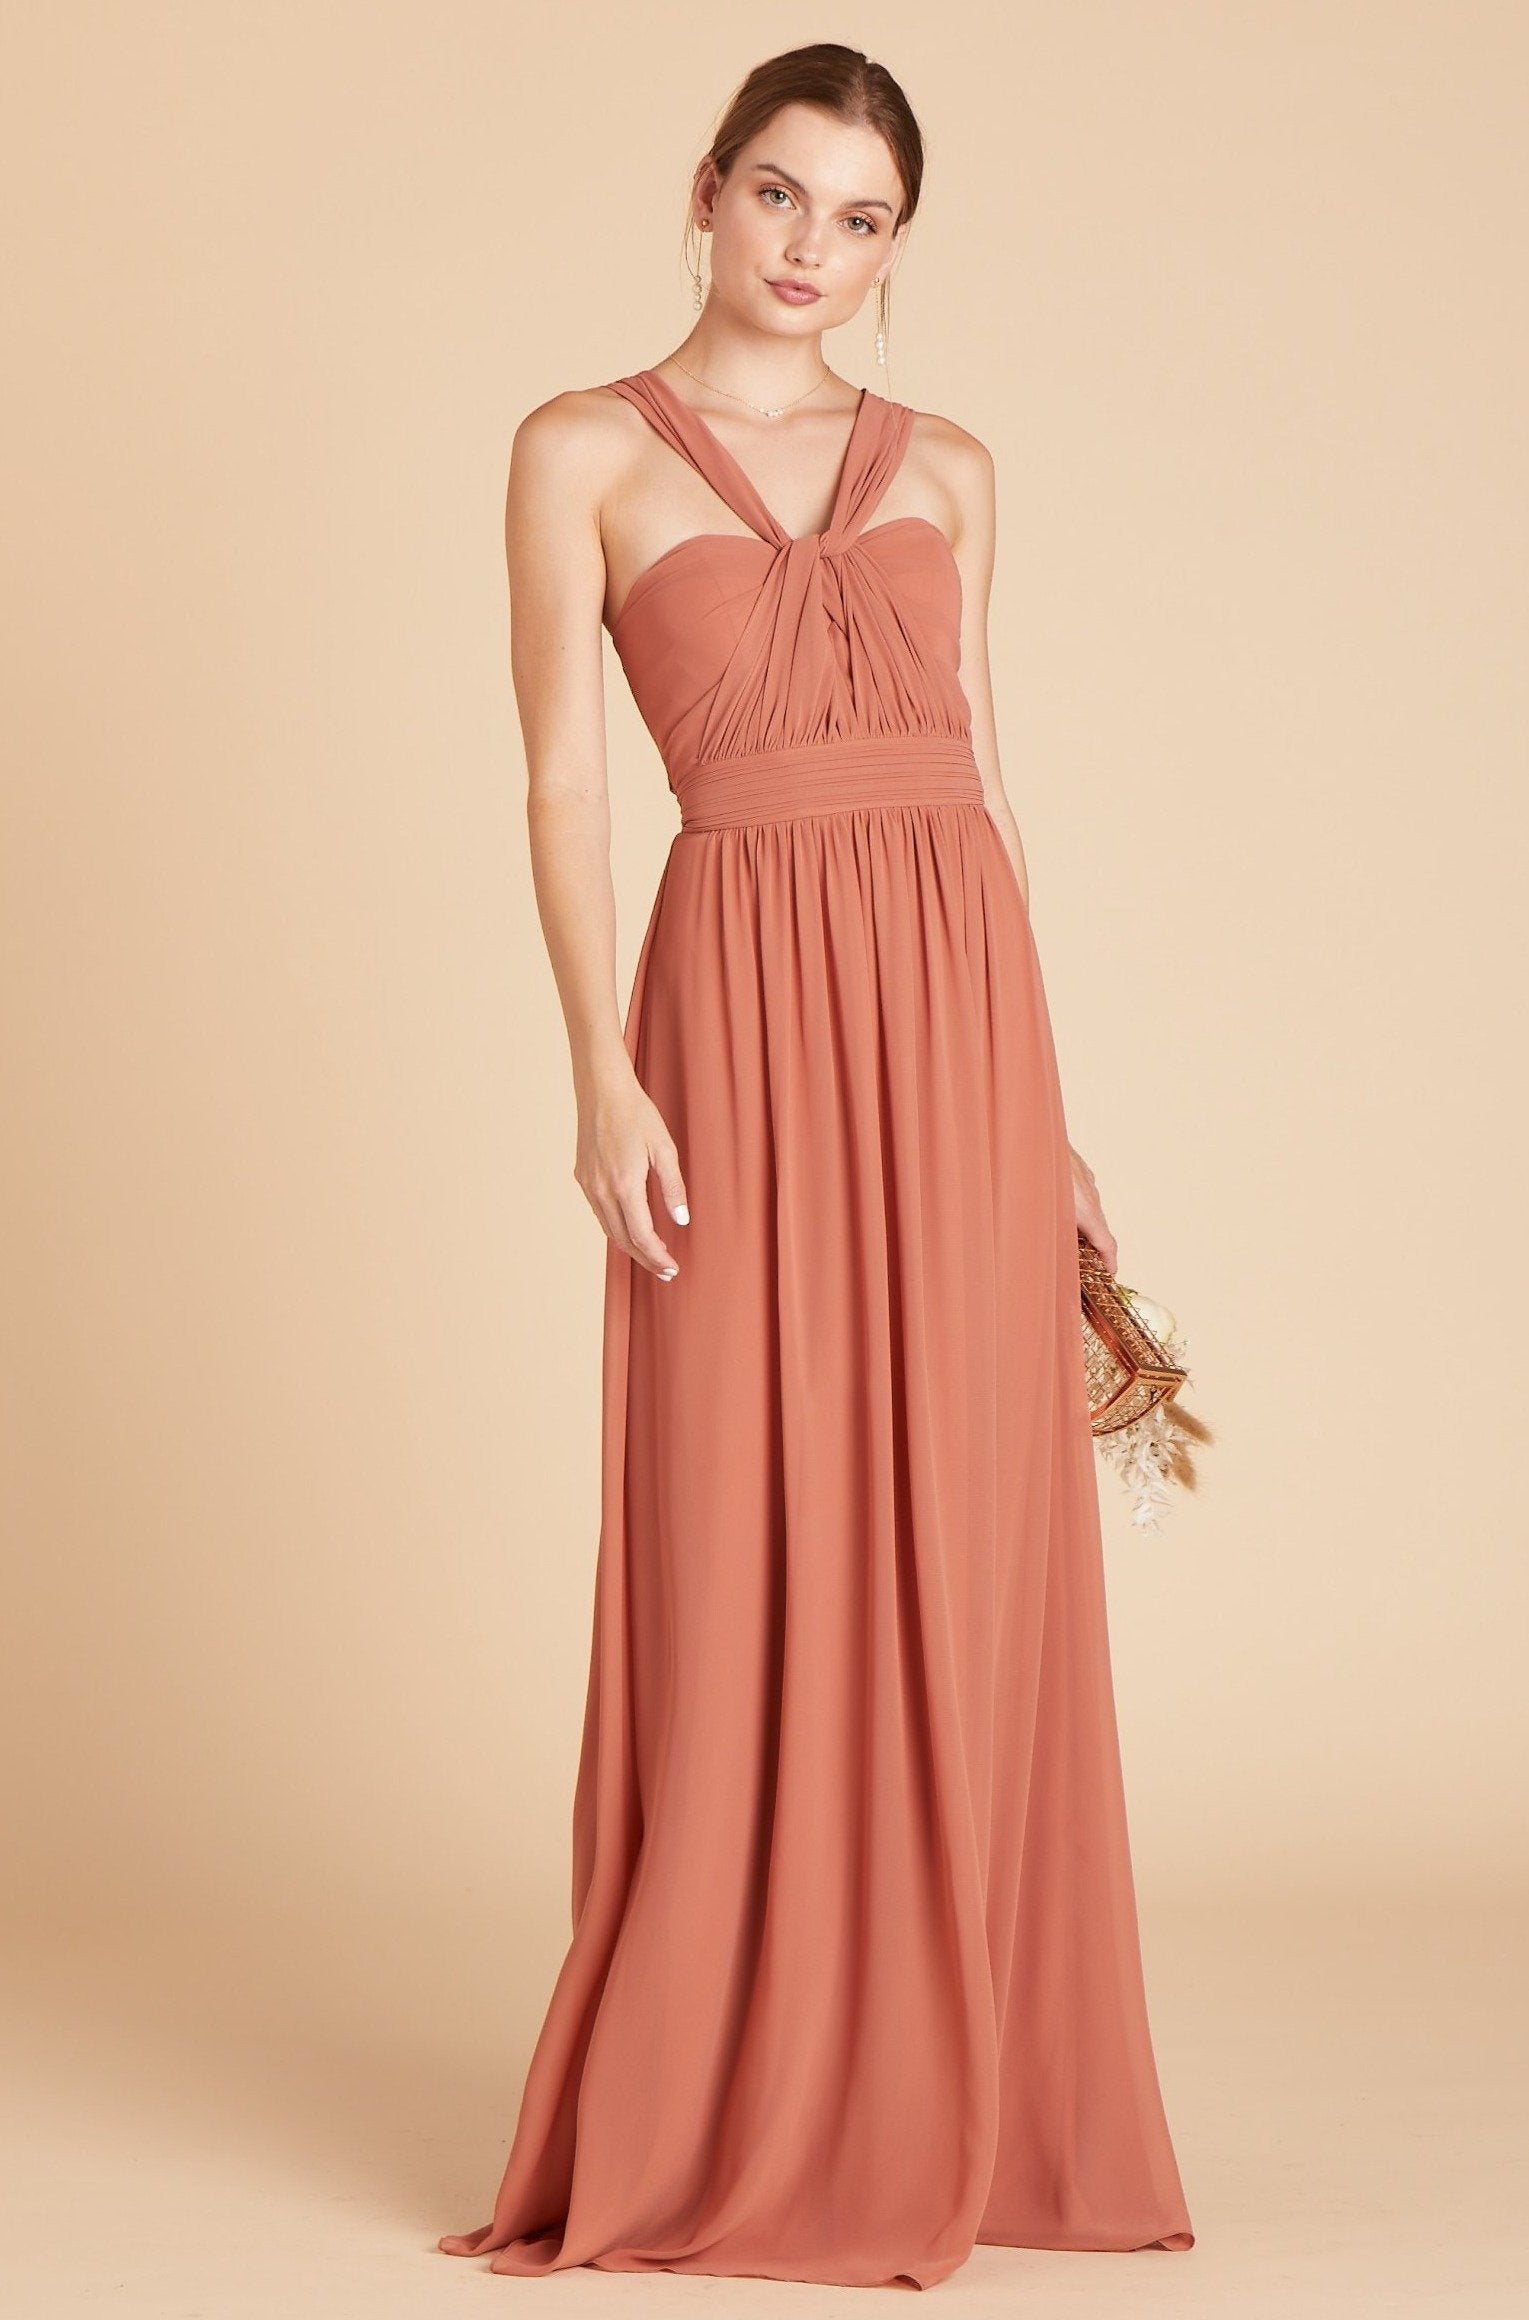 Grace convertible bridesmaid dress in terracotta orange chiffon by Birdy Grey, front view